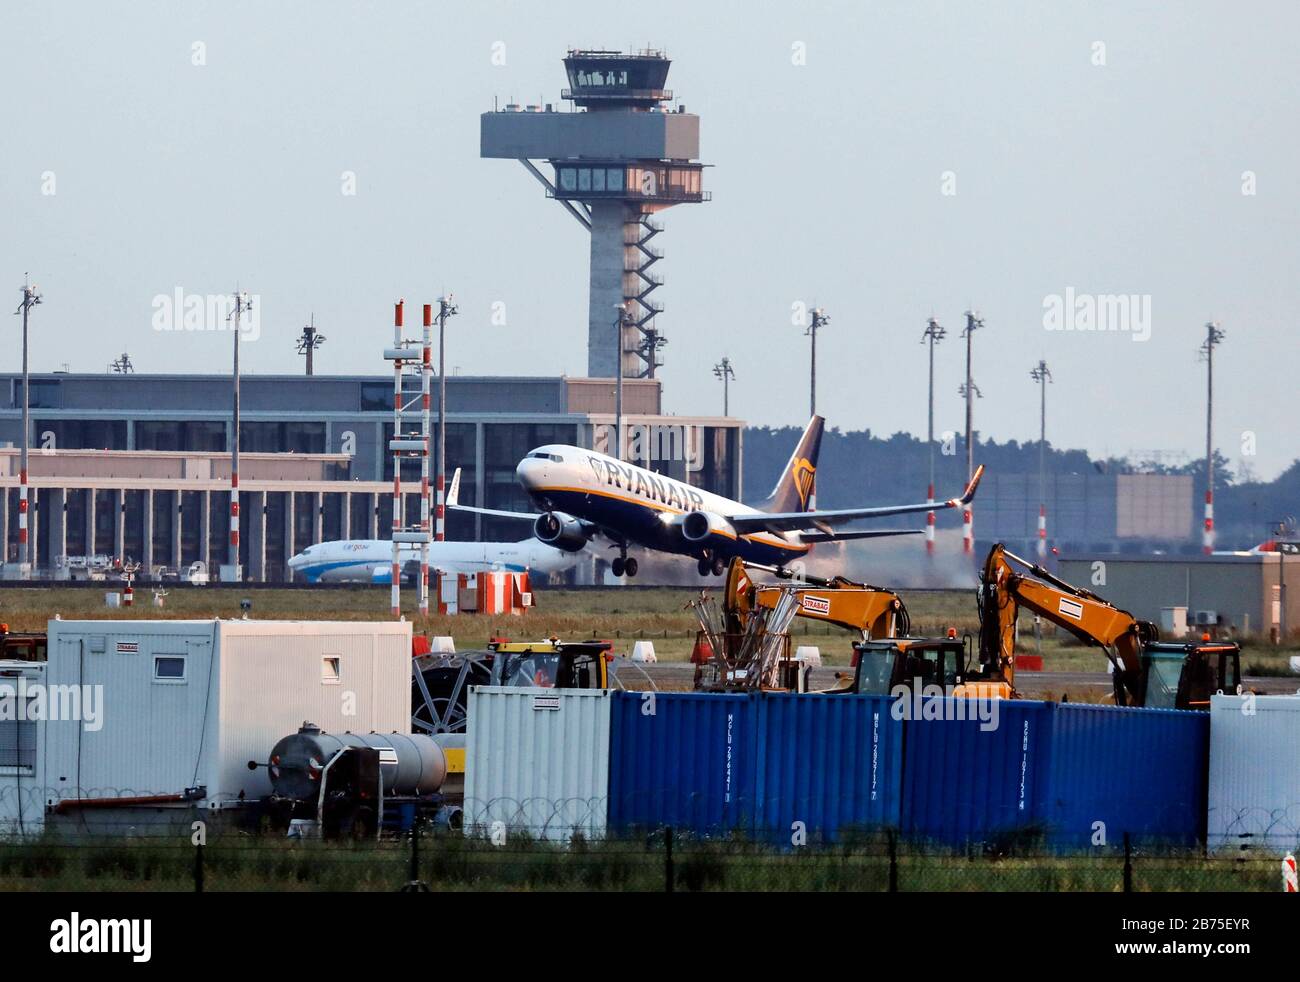 https://c8.alamy.com/comp/2B75EYR/a-boeing-737-of-the-airline-ryanair-will-take-off-from-schoenefeld-airport-the-runway-passes-the-construction-site-of-ber-airport-berlin-brandenburg-in-the-background-you-can-see-the-new-tower-of-ber-der-ber-is-scheduled-to-open-in-2020-after-many-postponements-of-the-opening-date-automated-translation-2B75EYR.jpg